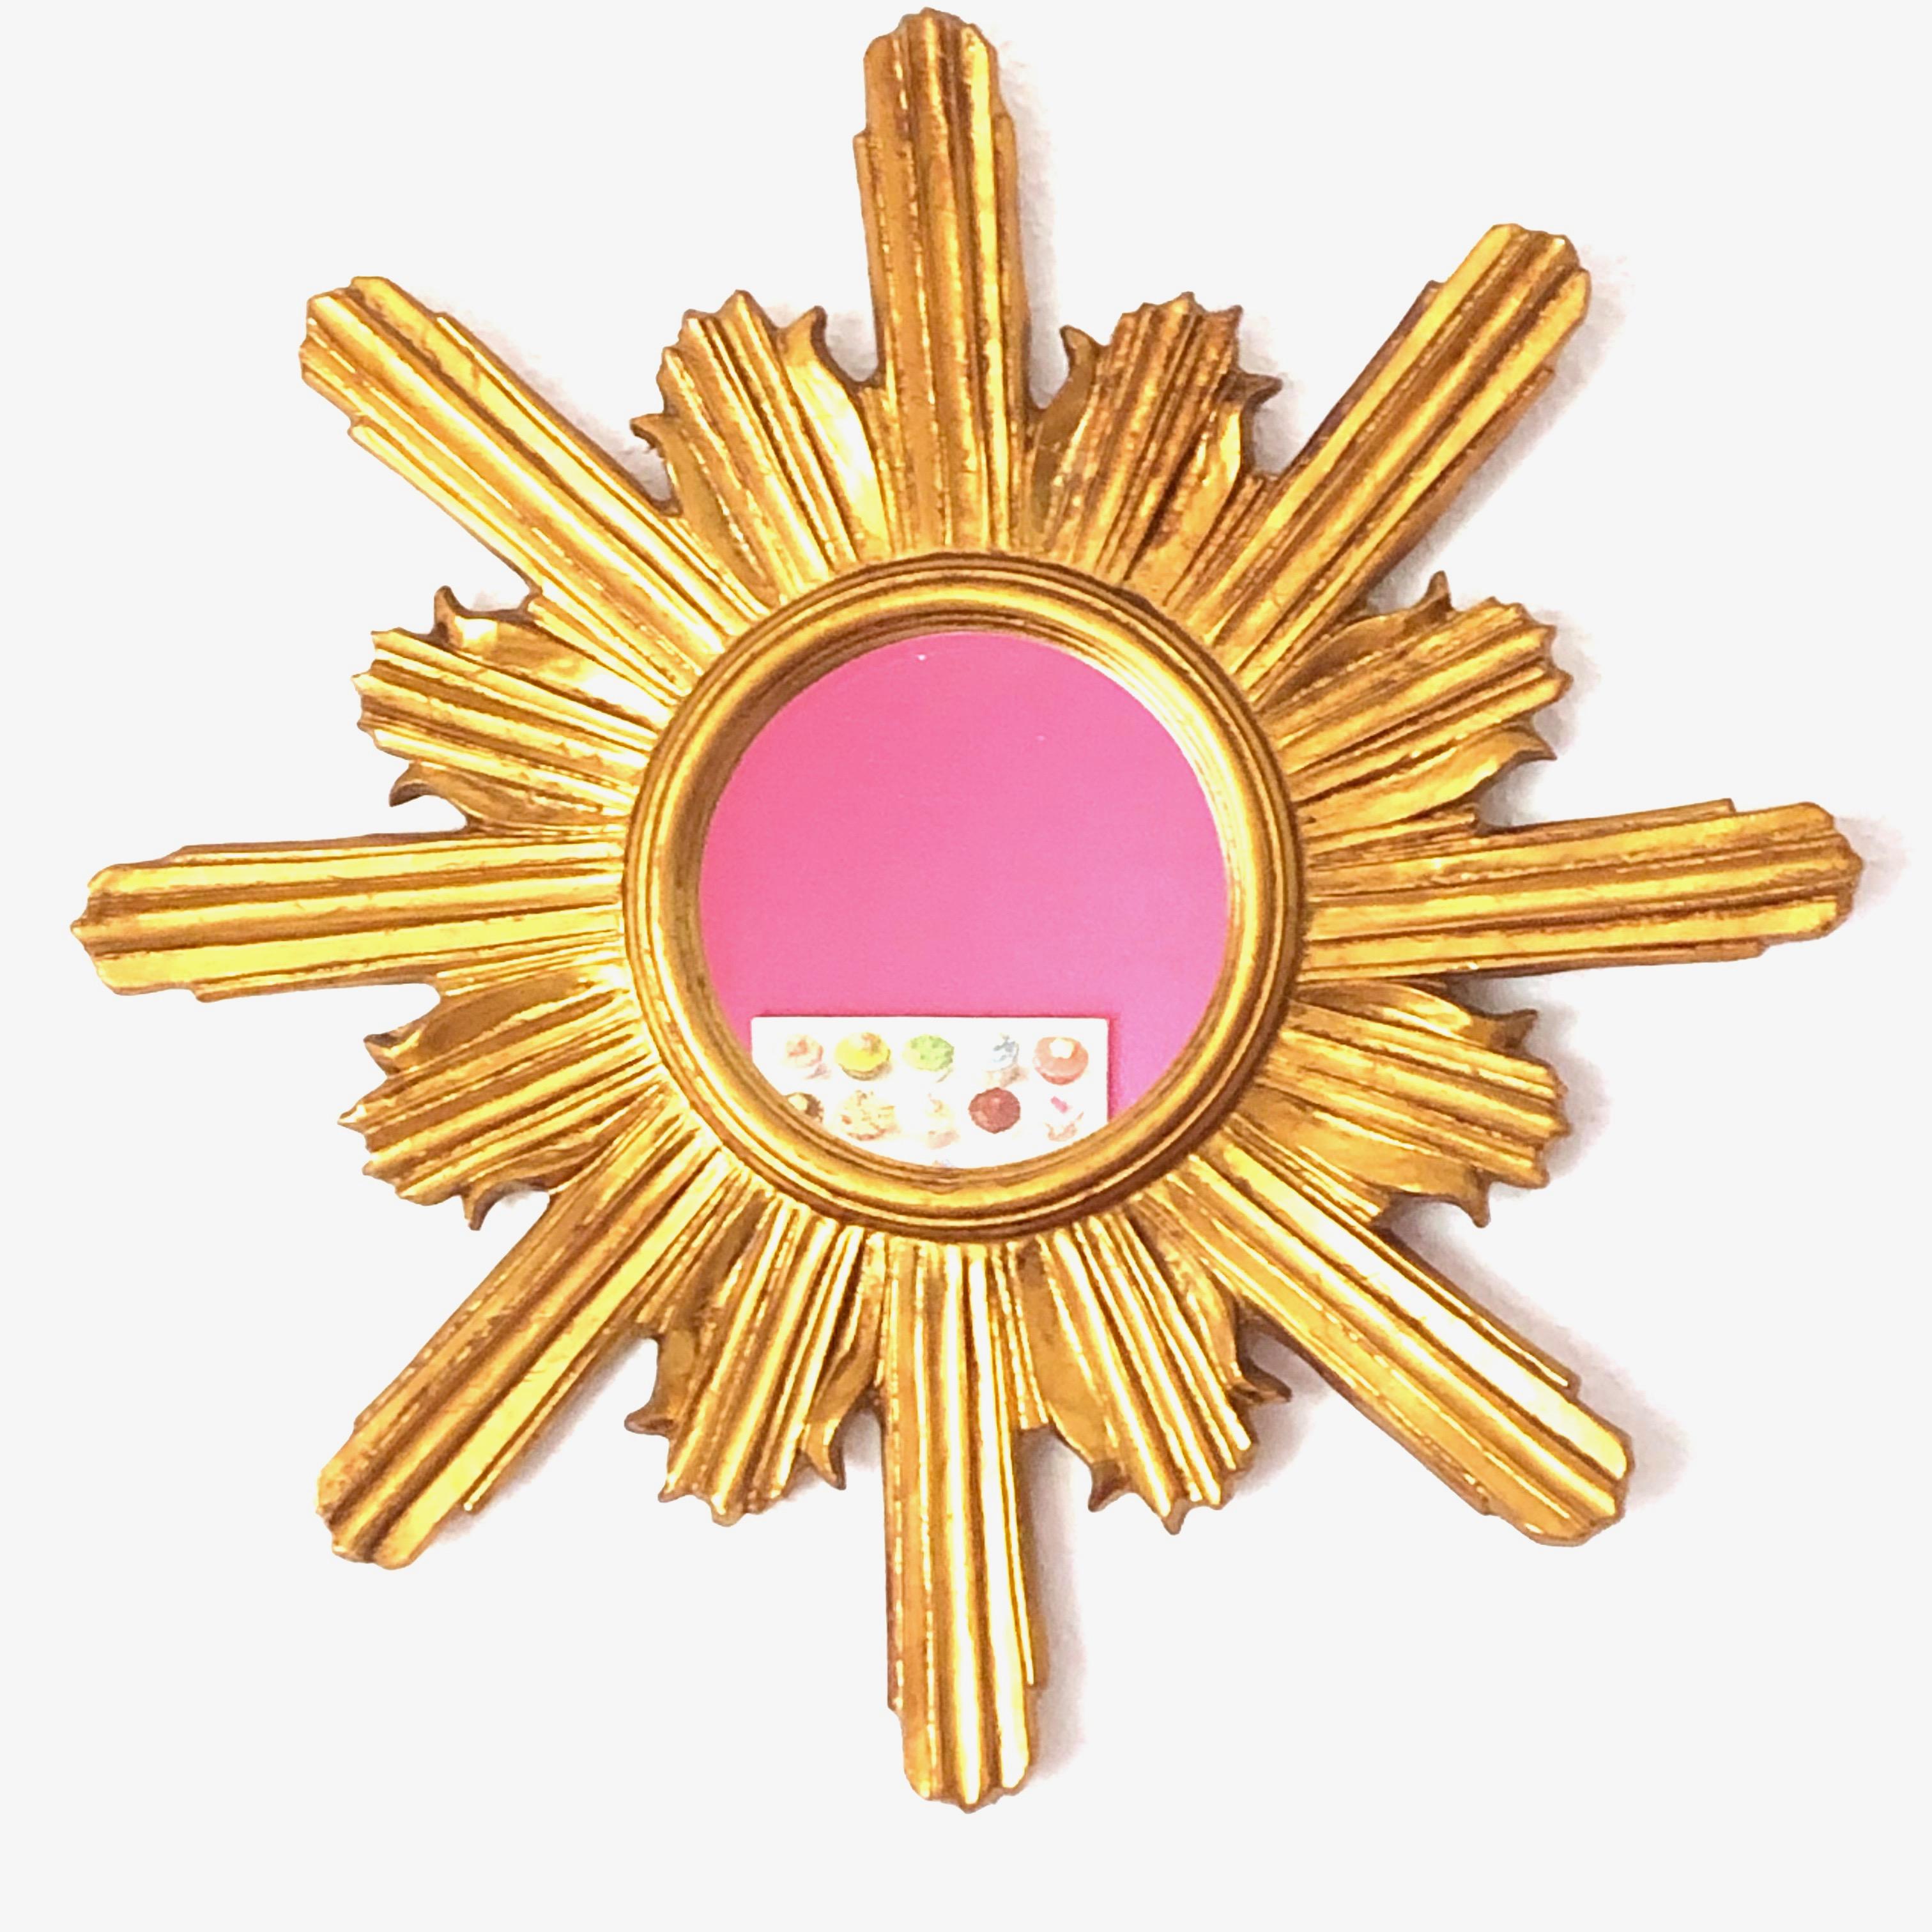 A gorgeous starburst mirror. Made of gilded wood and stucco. No chips, no cracks, no repairs. It measures approximate 23 ¼